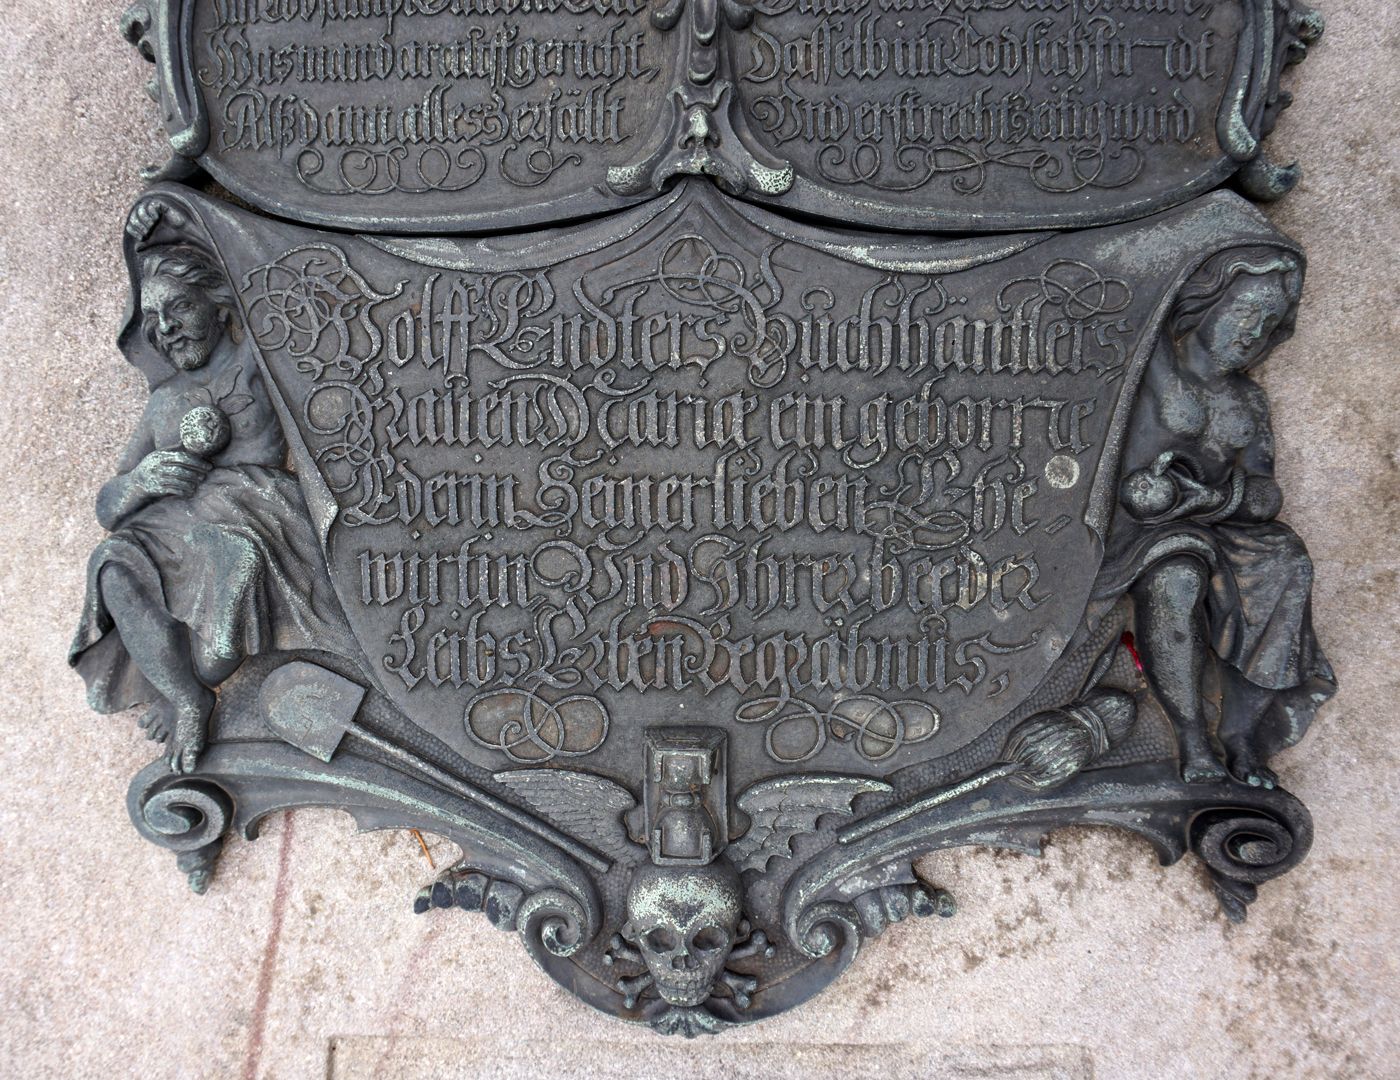 epitaph for Wolfgang Endter and wife Maria Oeder Nuremberg, Johannisfriedhof, grave number P122 Wolff Endters bookseller, wife Mariae a née Ederin his dear landlady and her other body heirs funeral